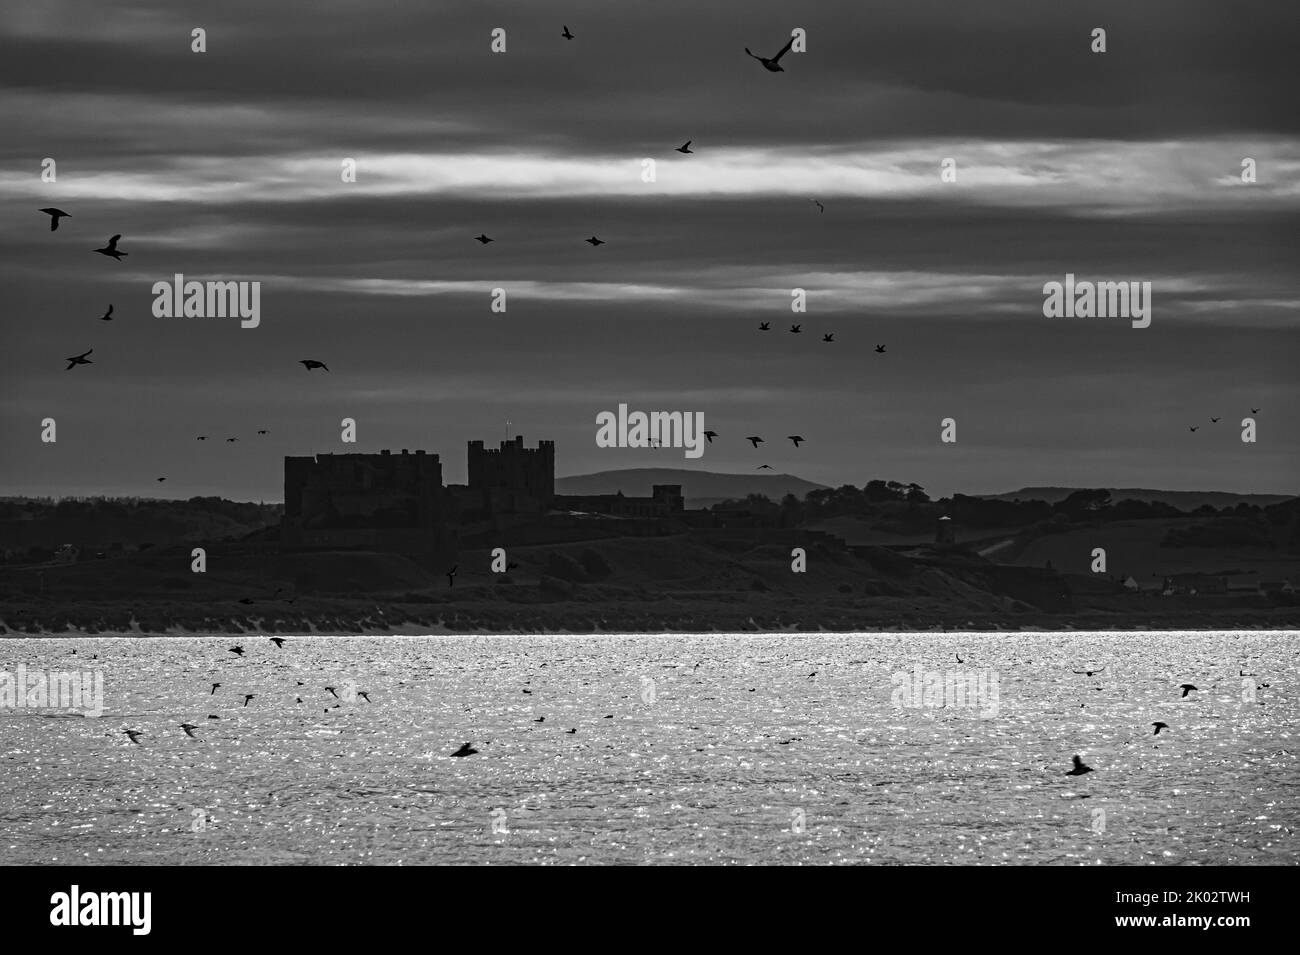 Château de Bamburgh, Northumberland, Angleterre, n/b Banque D'Images